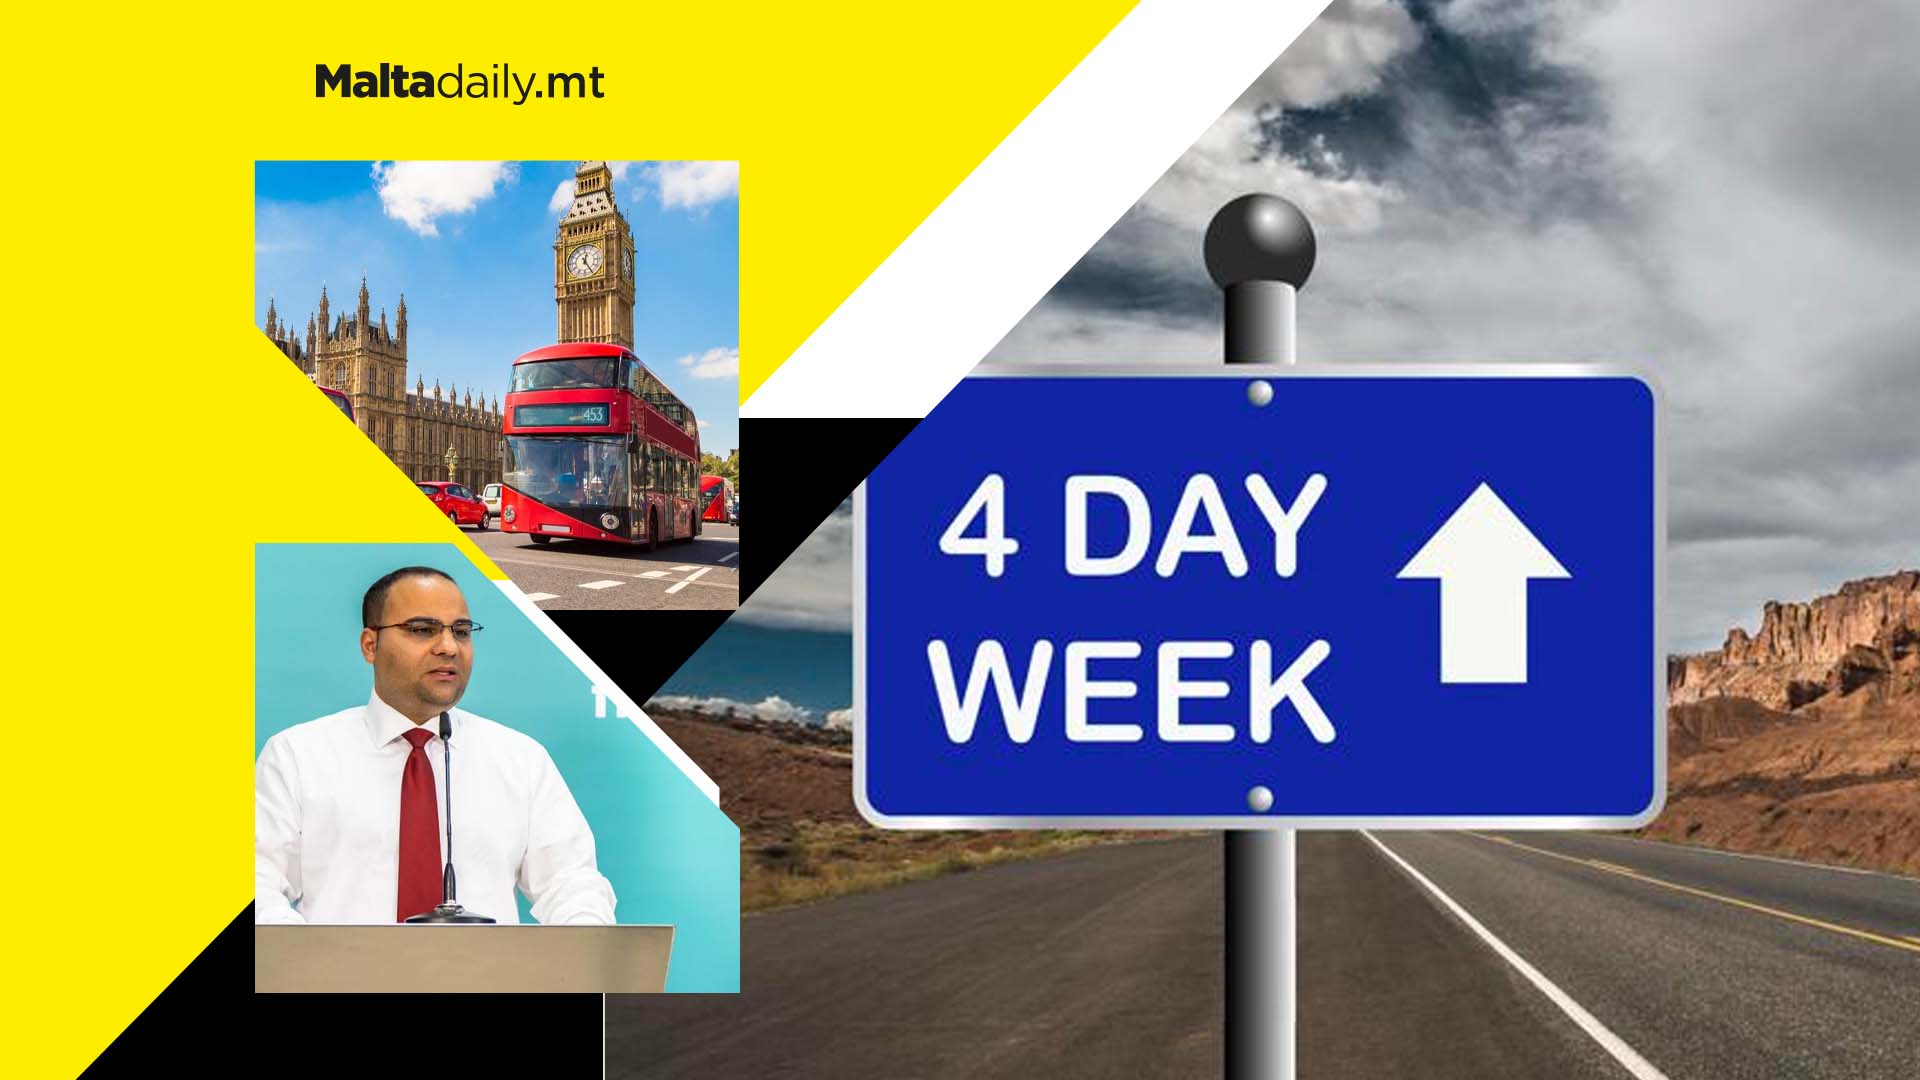 The UK to trial the four-day working week - but what about Malta?